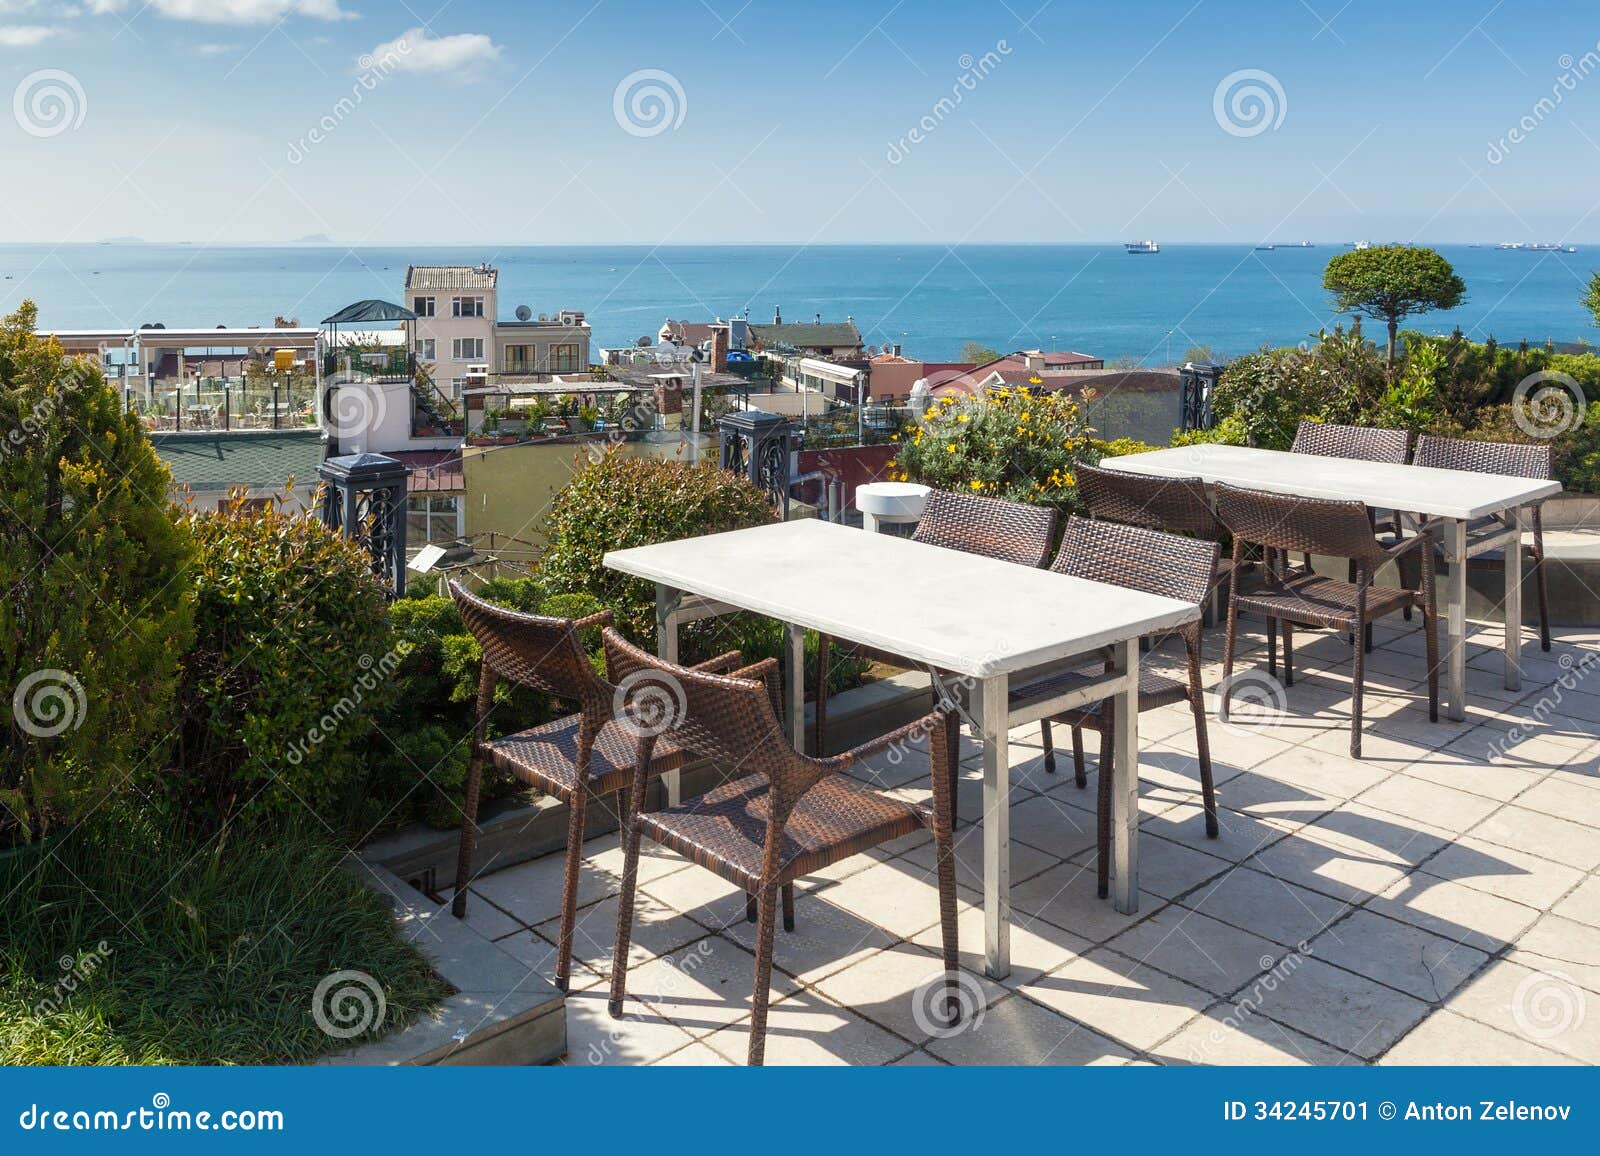 empty cafe tables high over city and marmara sea, istanbul